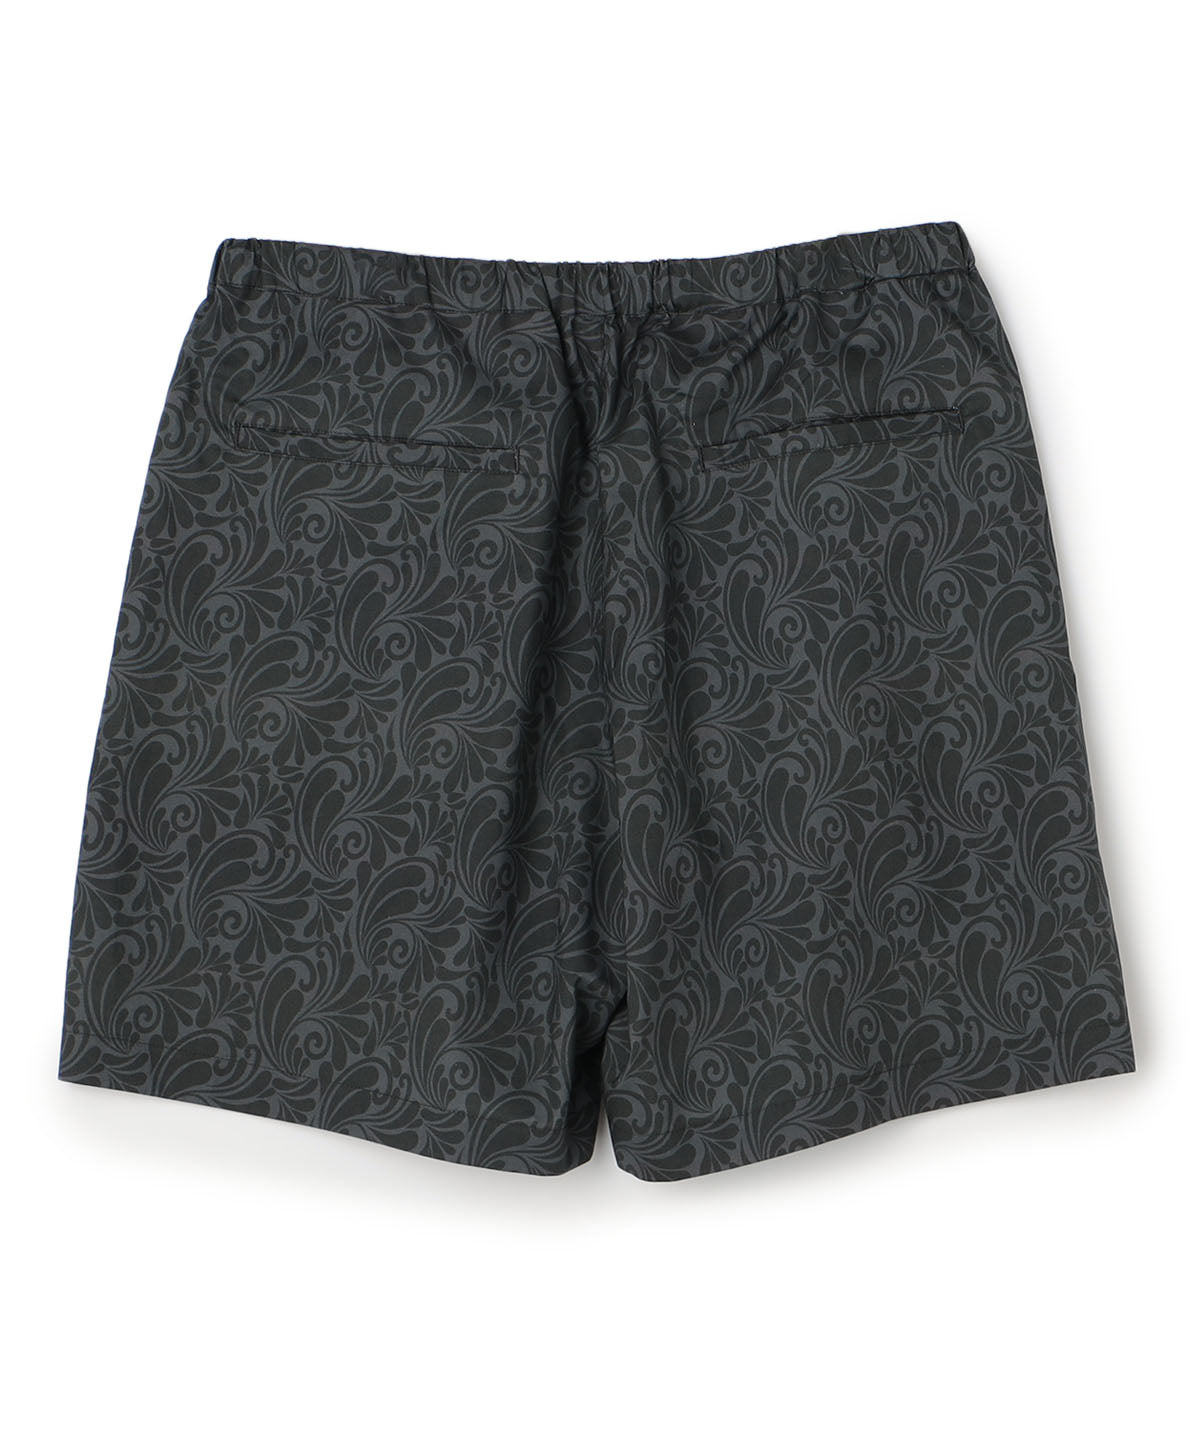 African Textile shorts  CHARCOAL